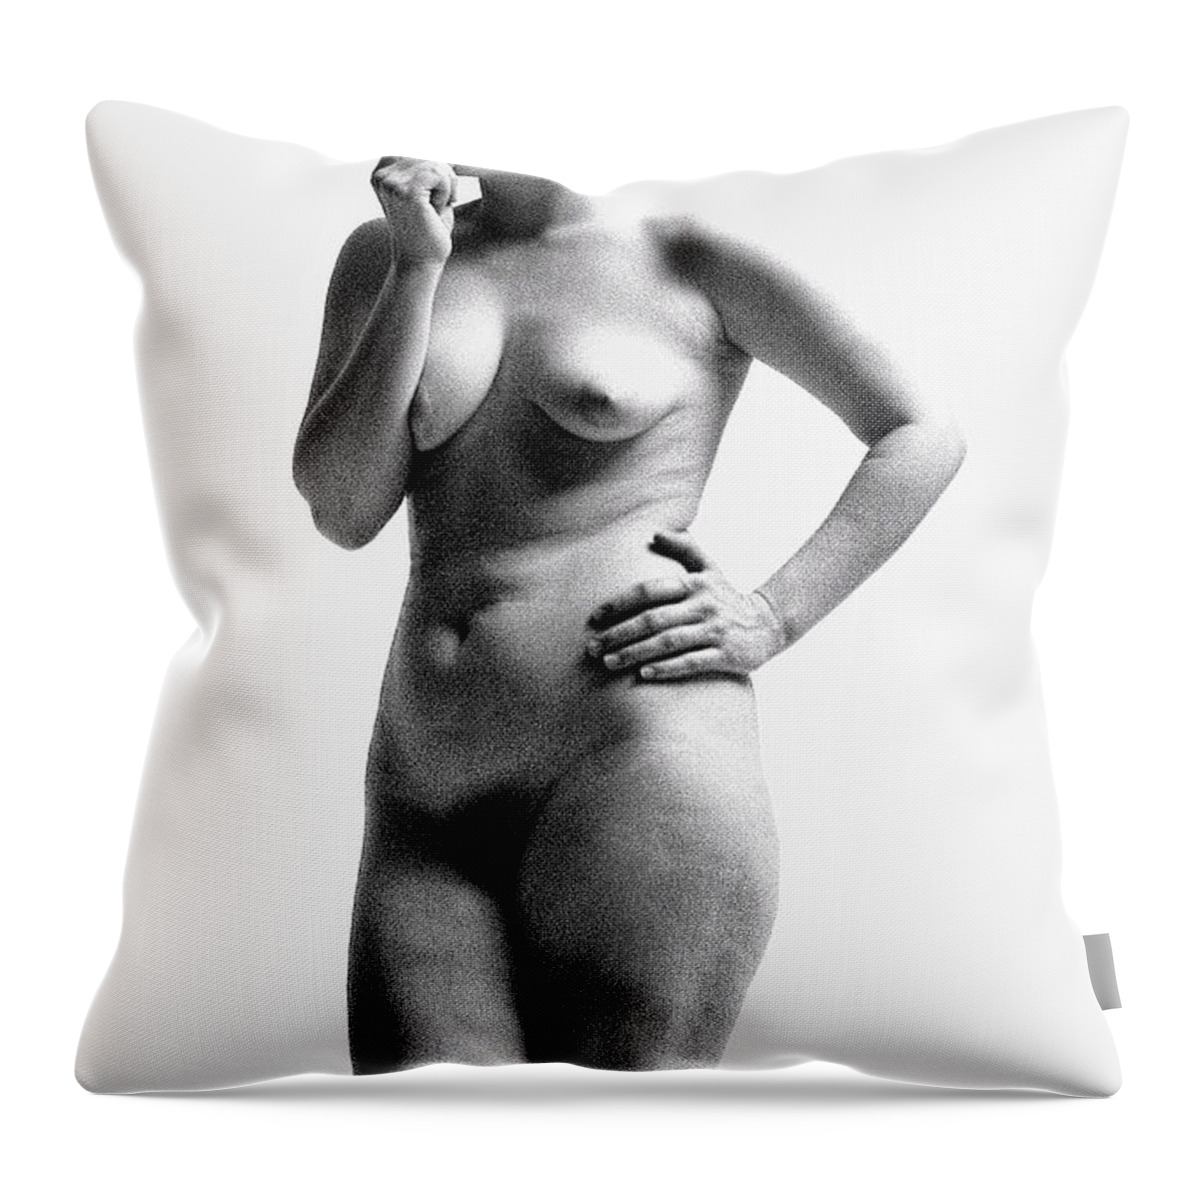 Nude Throw Pillow featuring the photograph Nude II by David Patterson